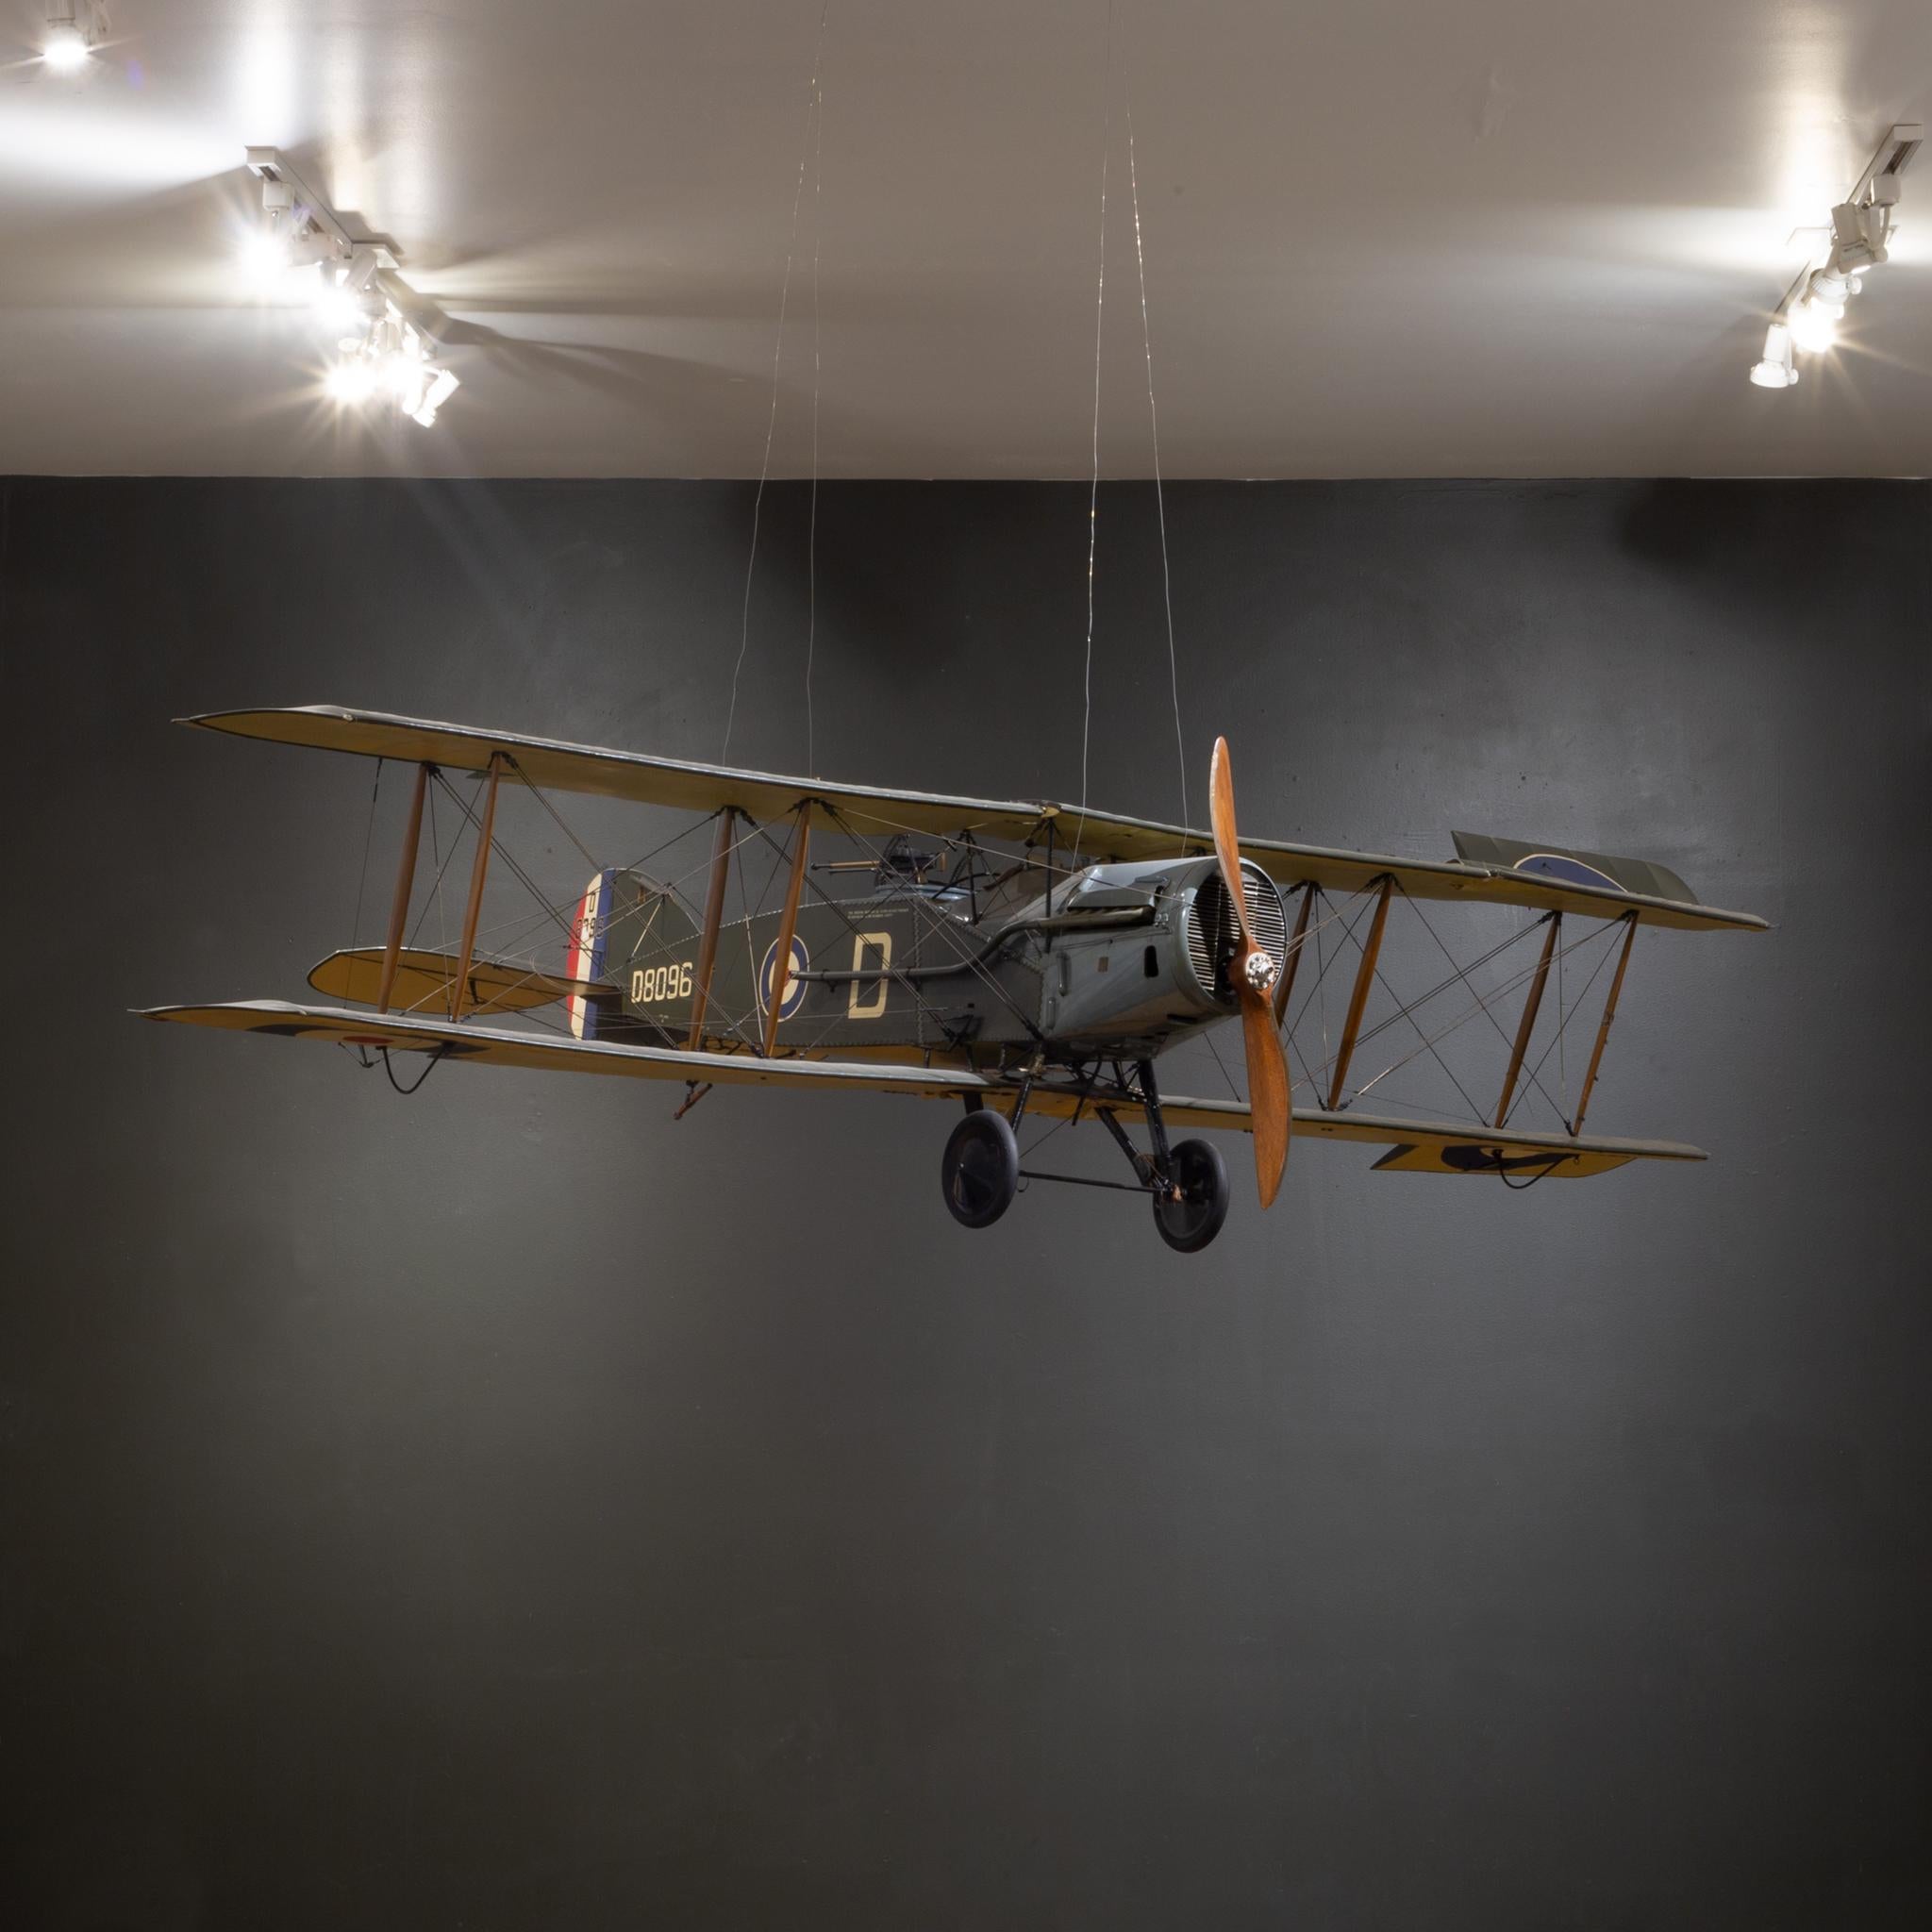 About

This is an unique, handmade exact replica model airplane of the British Bristol F.2b Fighter. The model features wooden propeller, wooden tail skid and wooden struts. The engine is metal and the tires are rubber and metal. The cockpit